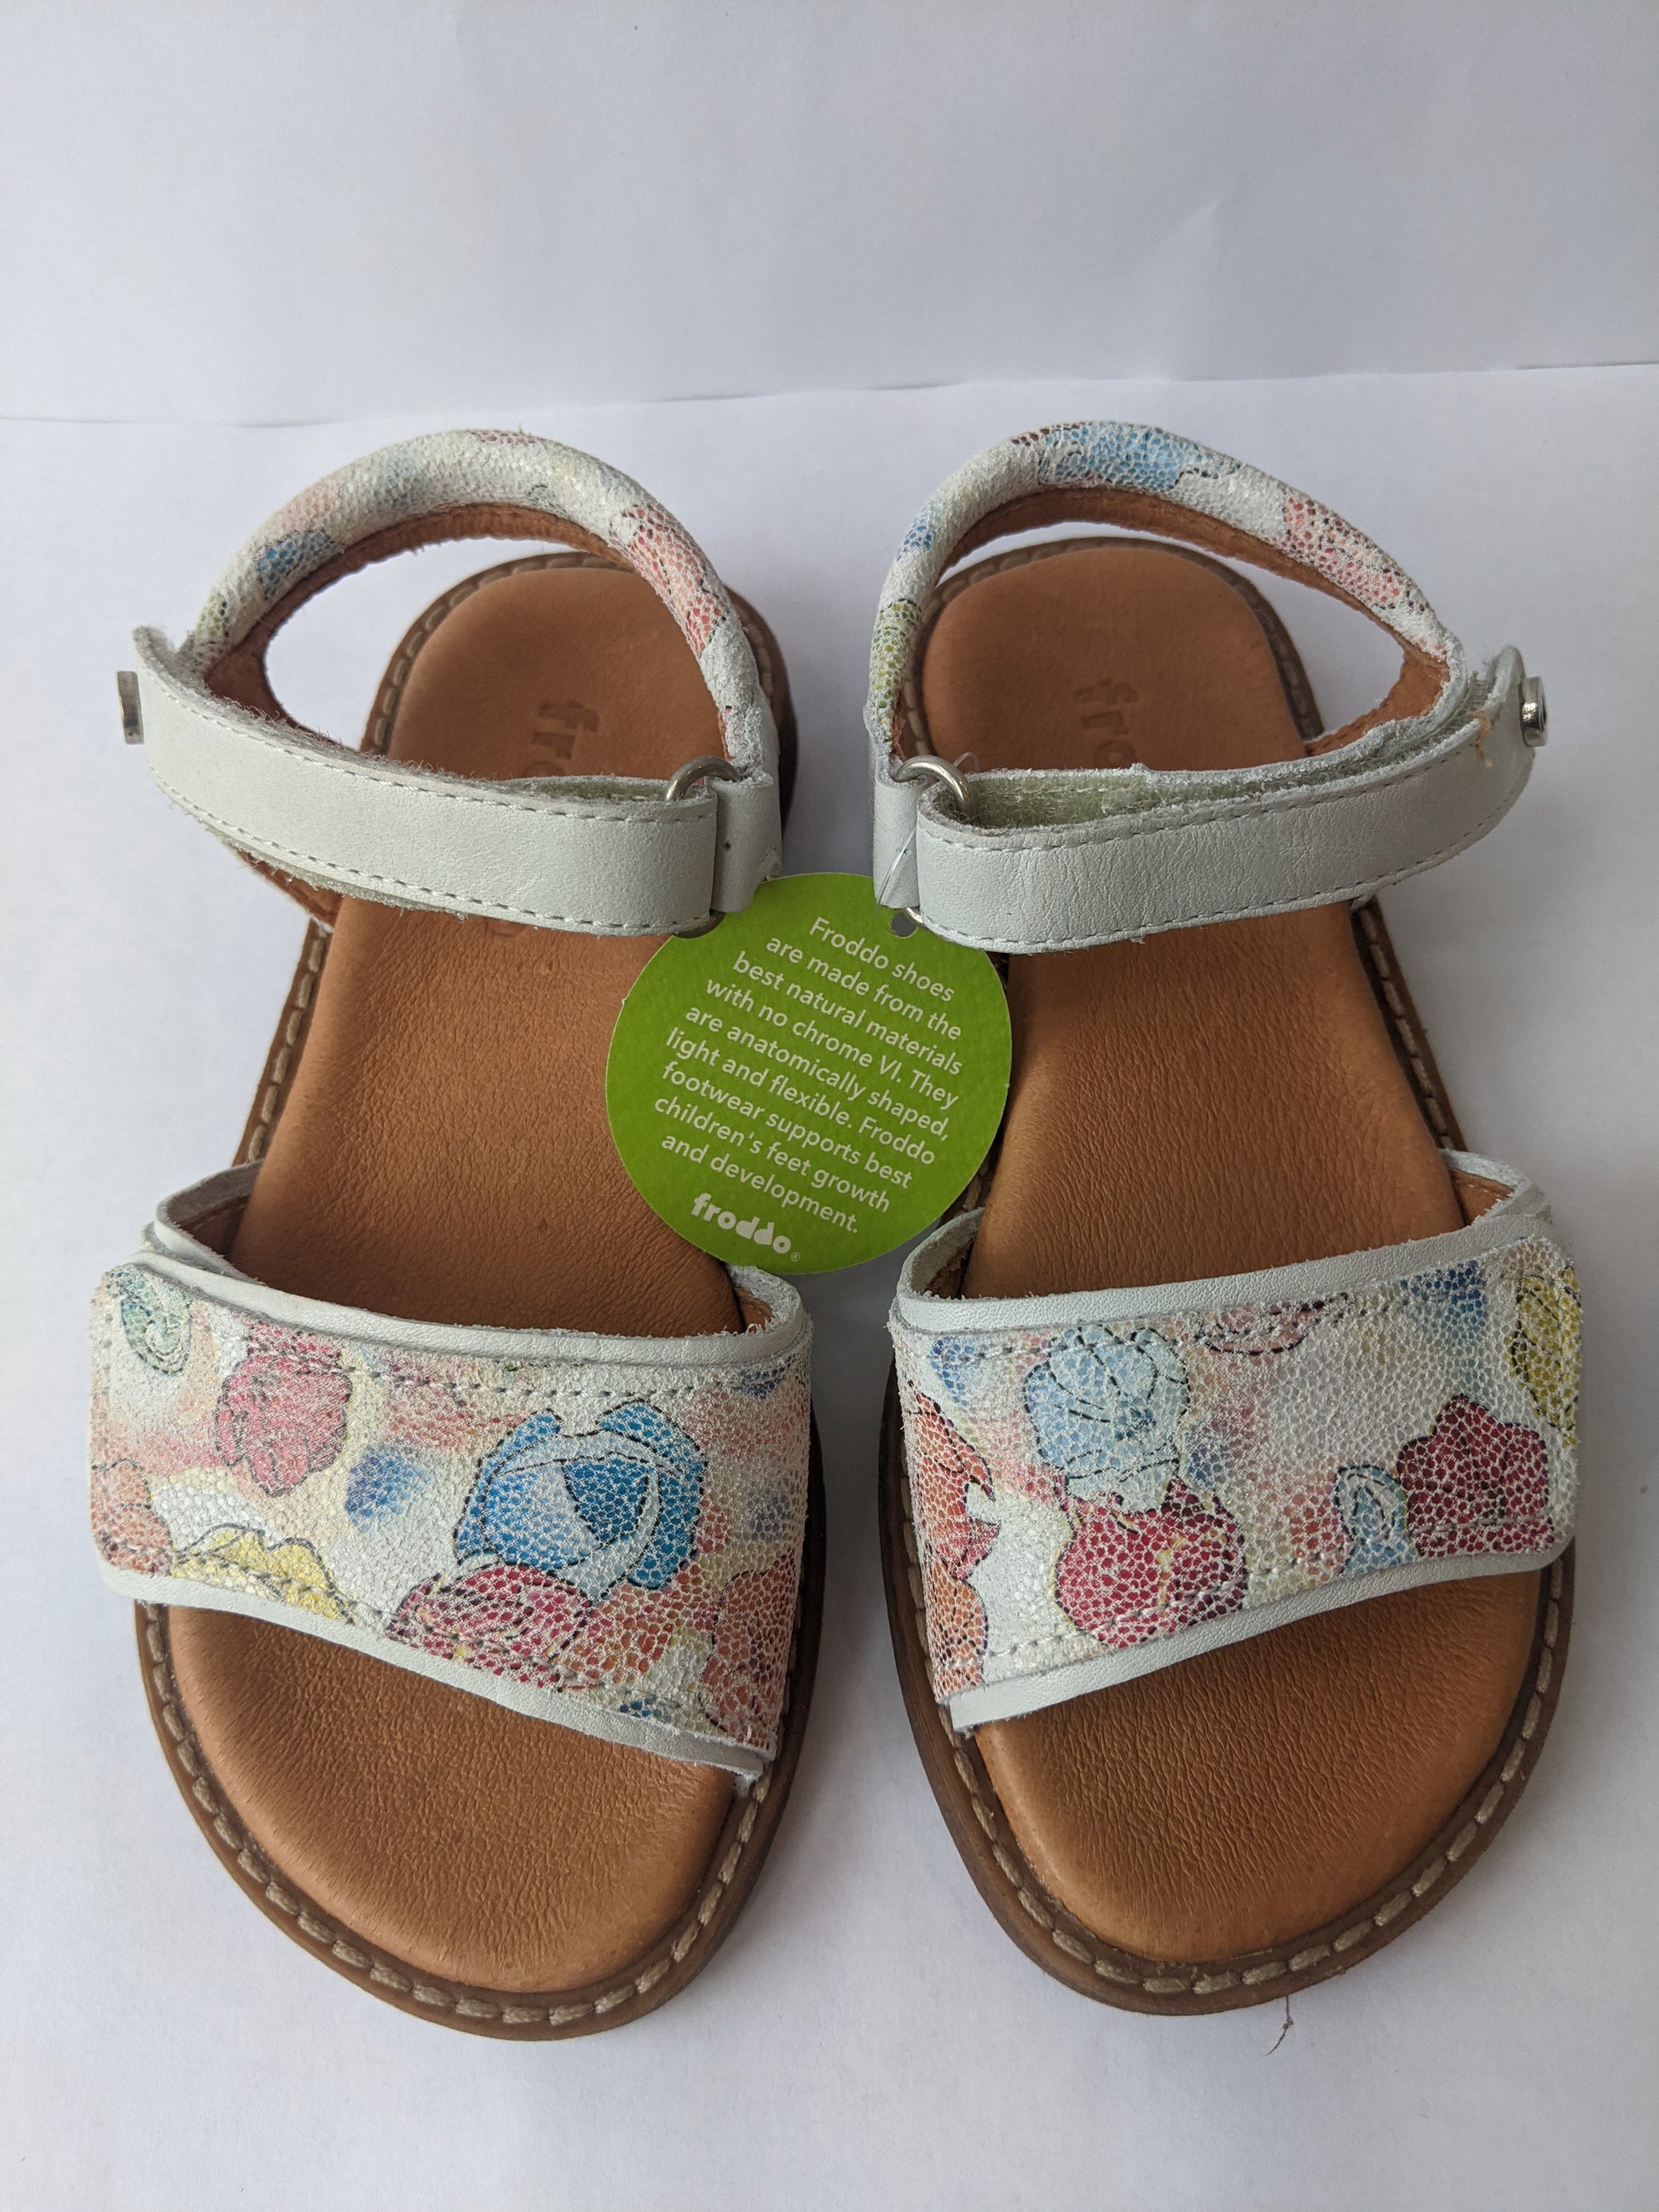 A pair of girls sandals by Froddo,style G3150117-1 in white floral leather with velcro fastening. Top view.